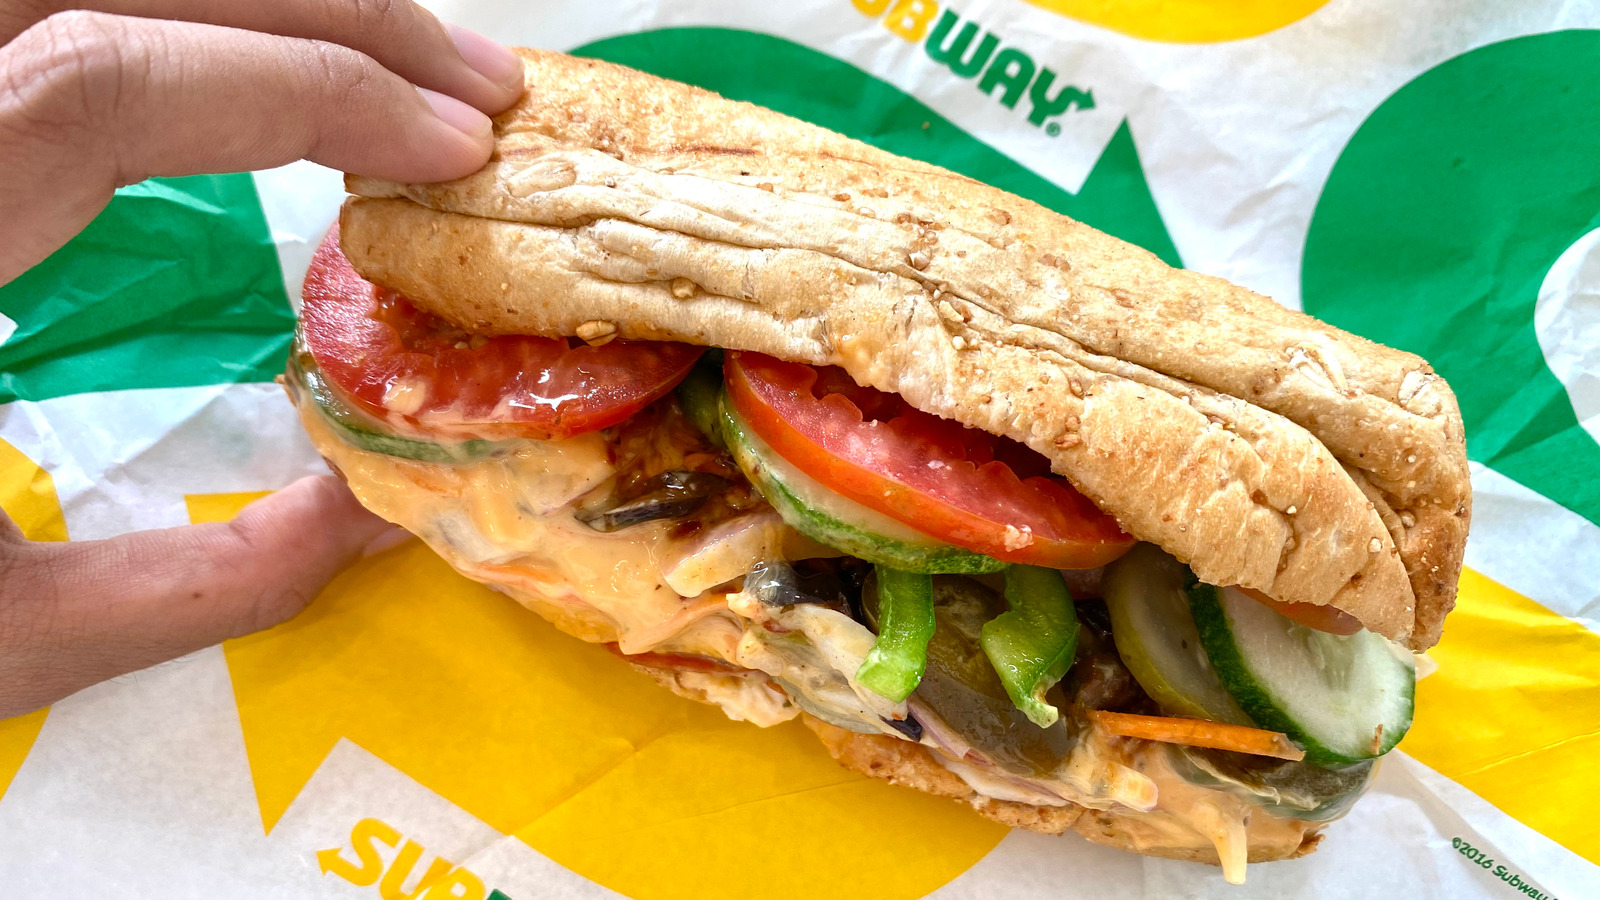 New Subway Series menu: How to try sandwiches for free